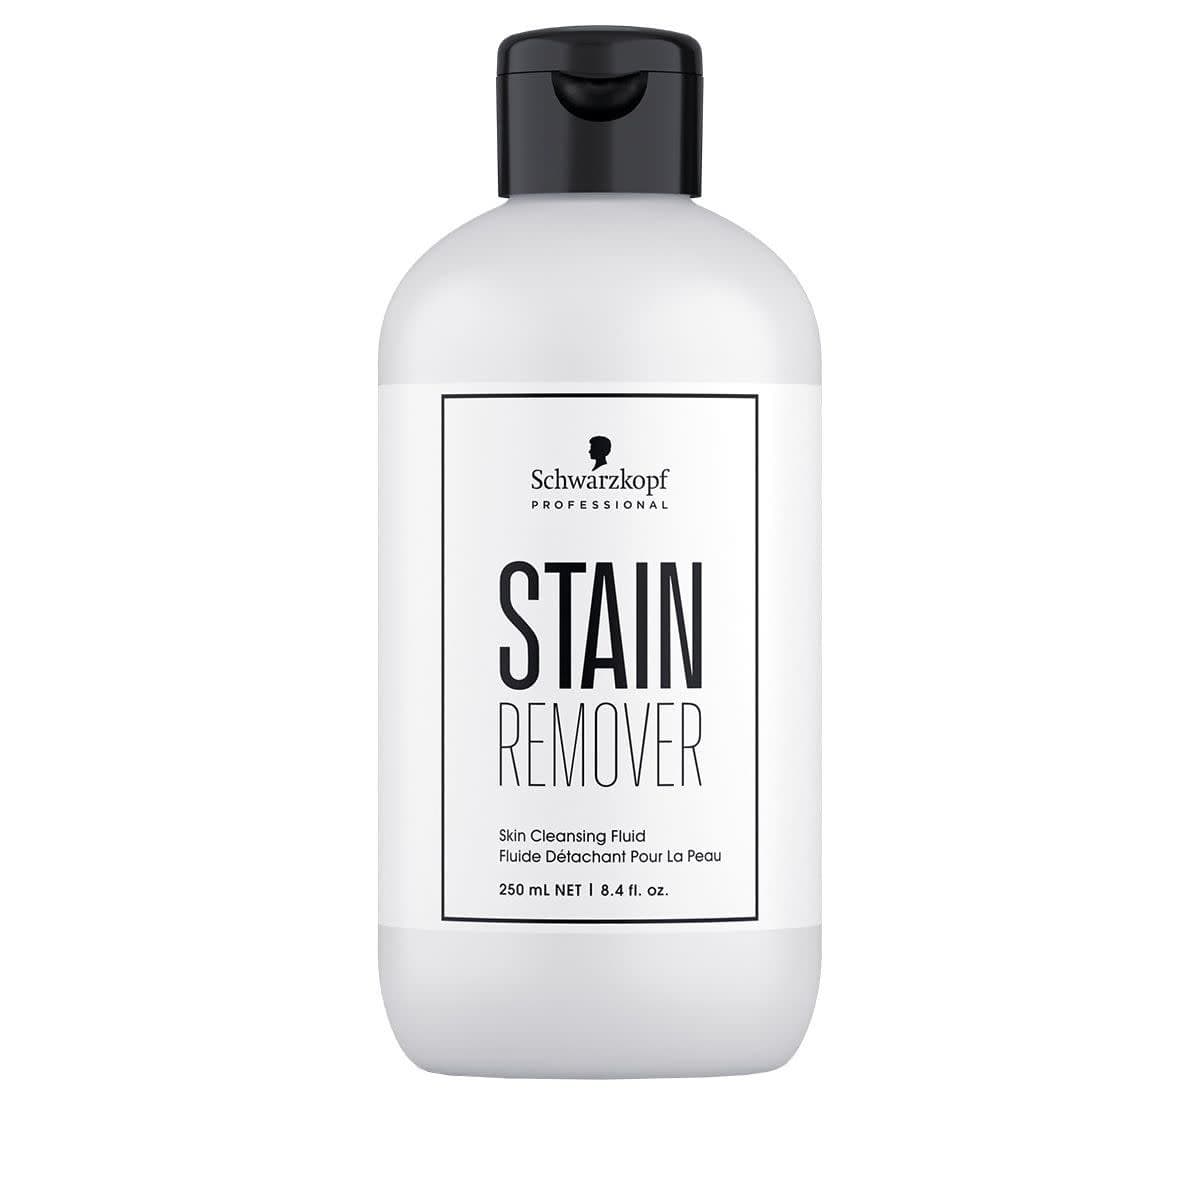 SCHWARZKOPF_Stain Remover Skin Cleansing Fluid 250ml / 8.4oz_Cosmetic World